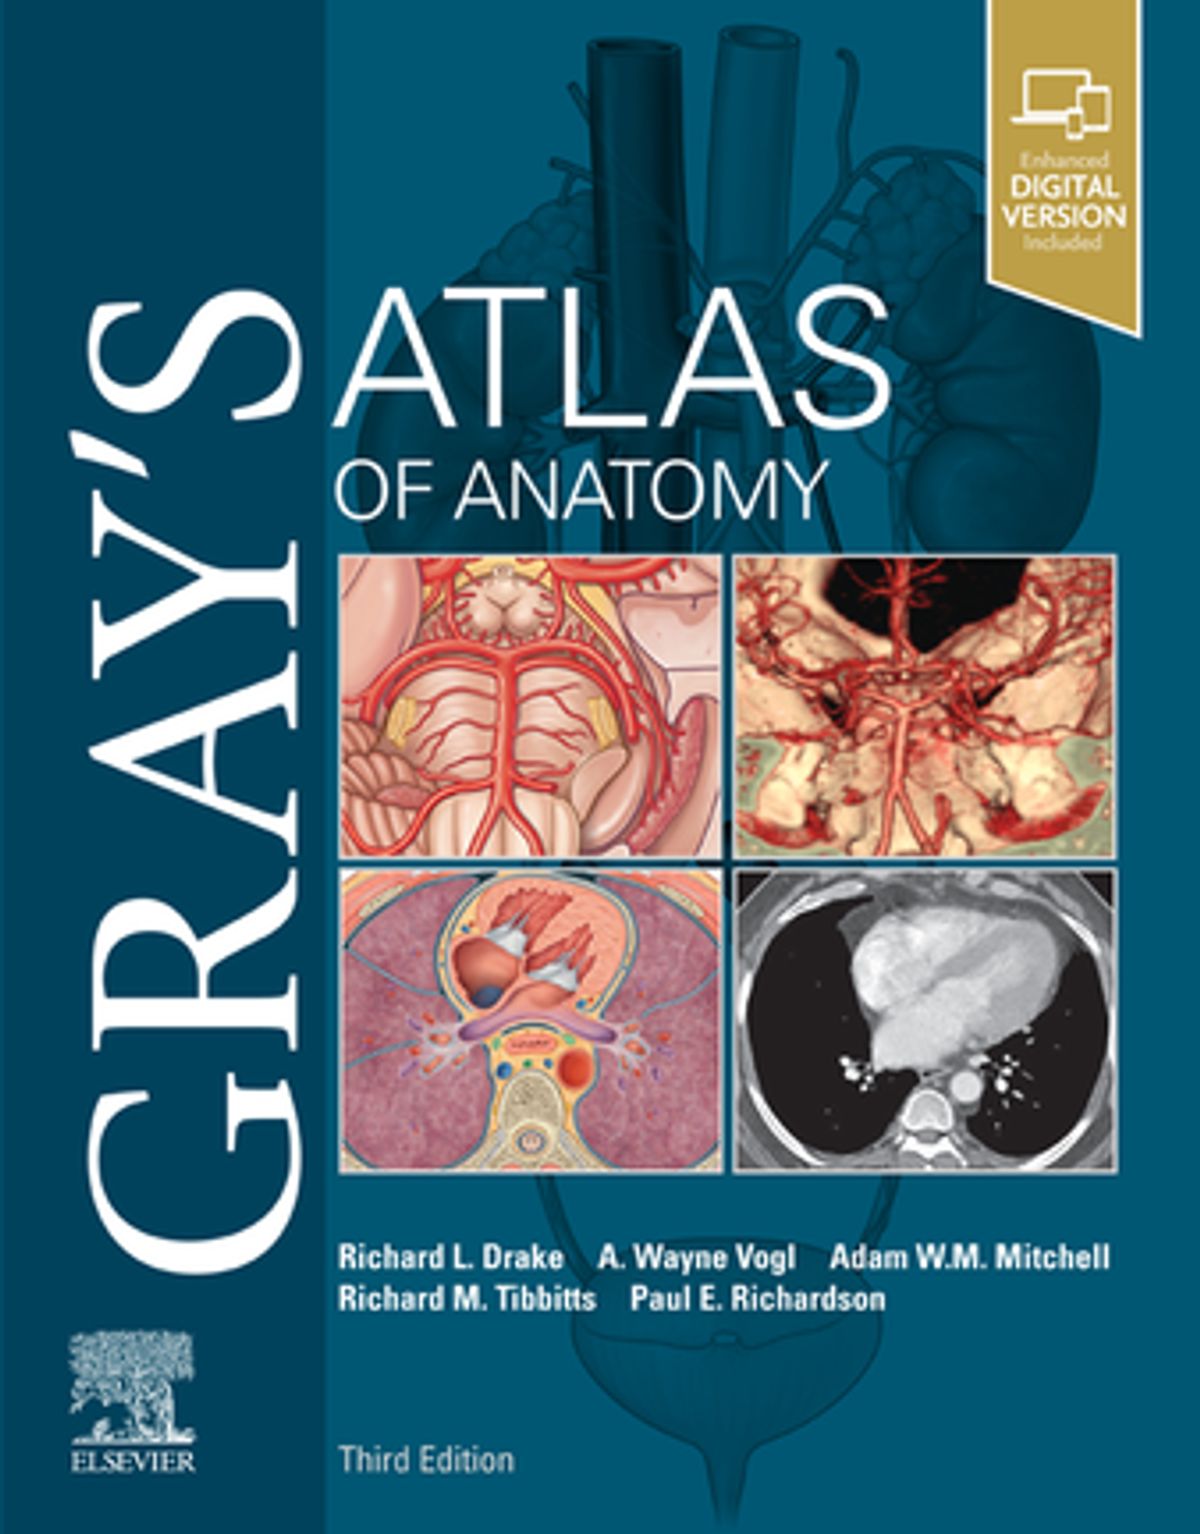 Download Gray's Atlas of Anatomy 3rd Edition PDF - Knowdemia